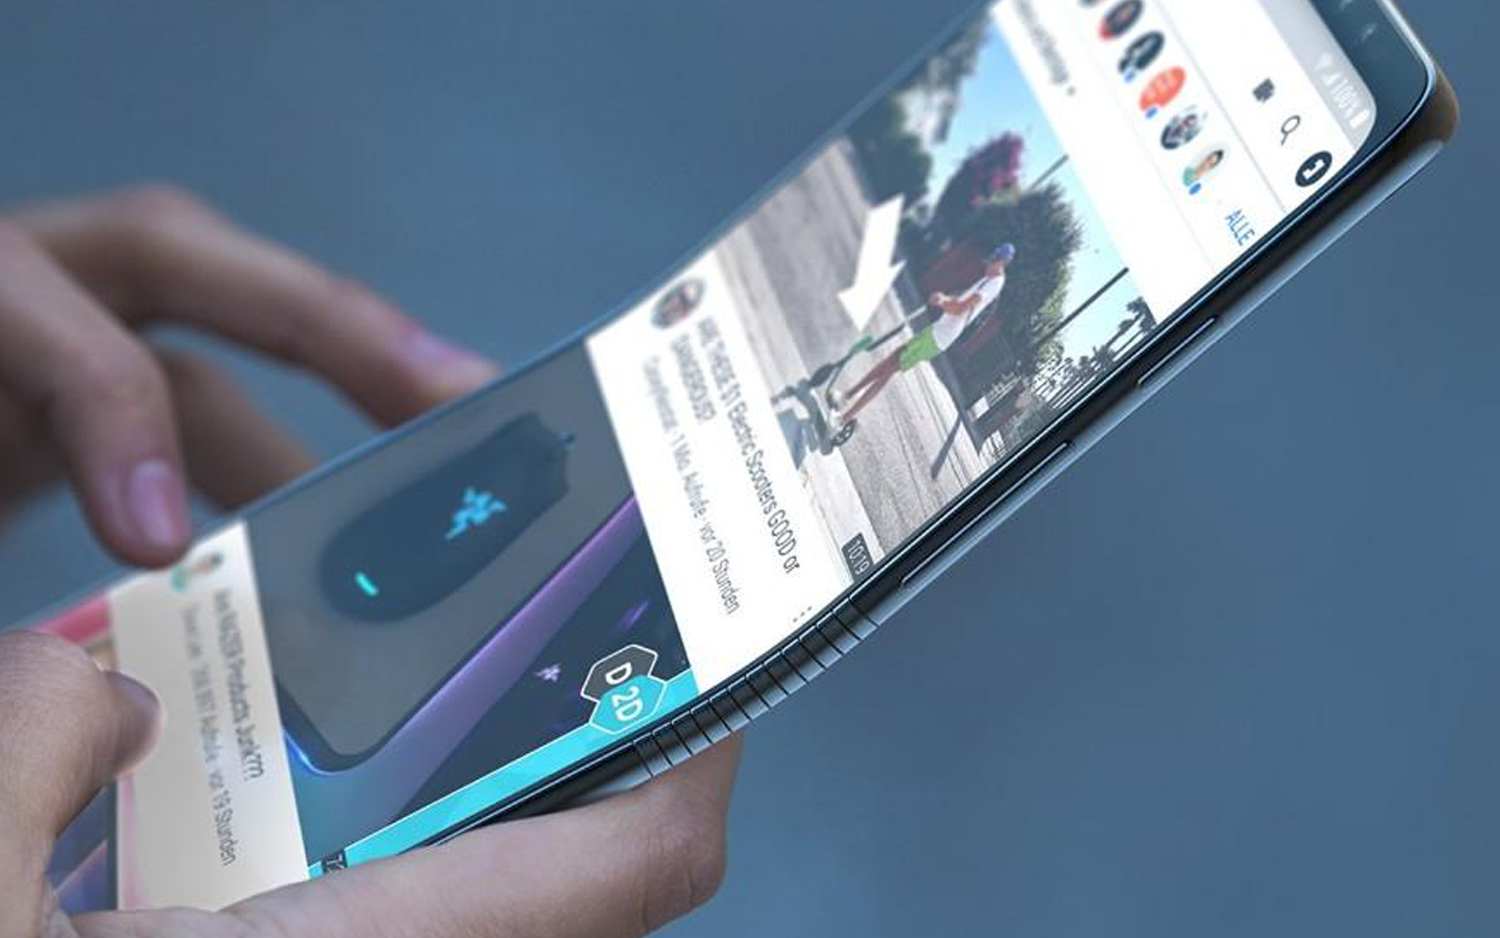 Samsung Will Release Foldable Galaxy Clamshell Just Like The Razr